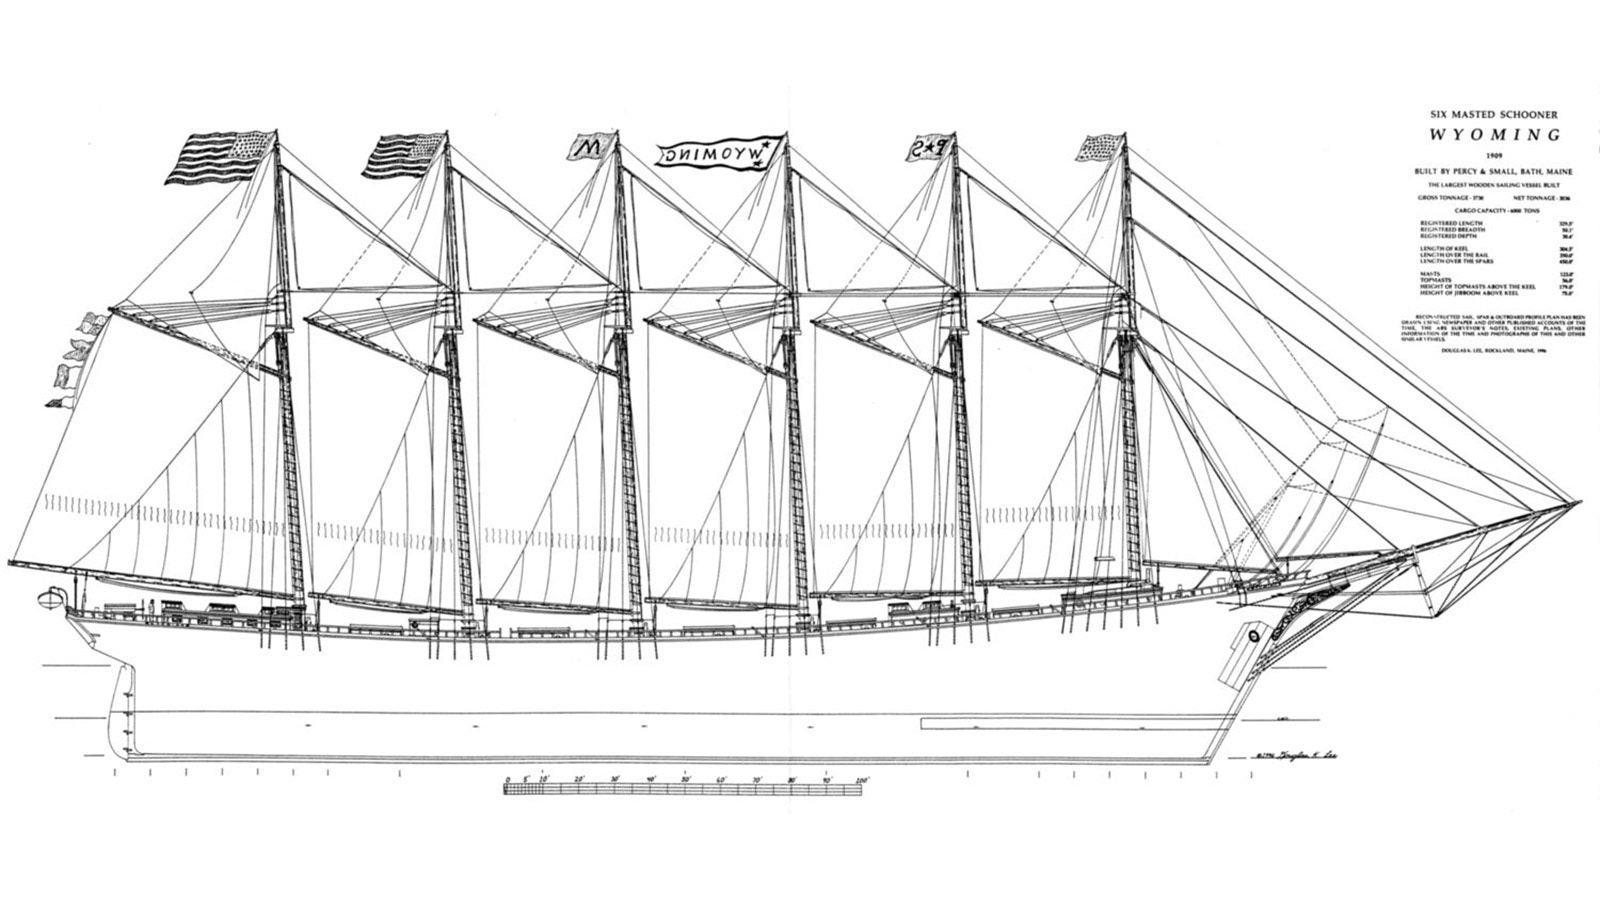 A drawing by Doug Lee outlines the sail plan for the Wyoming.